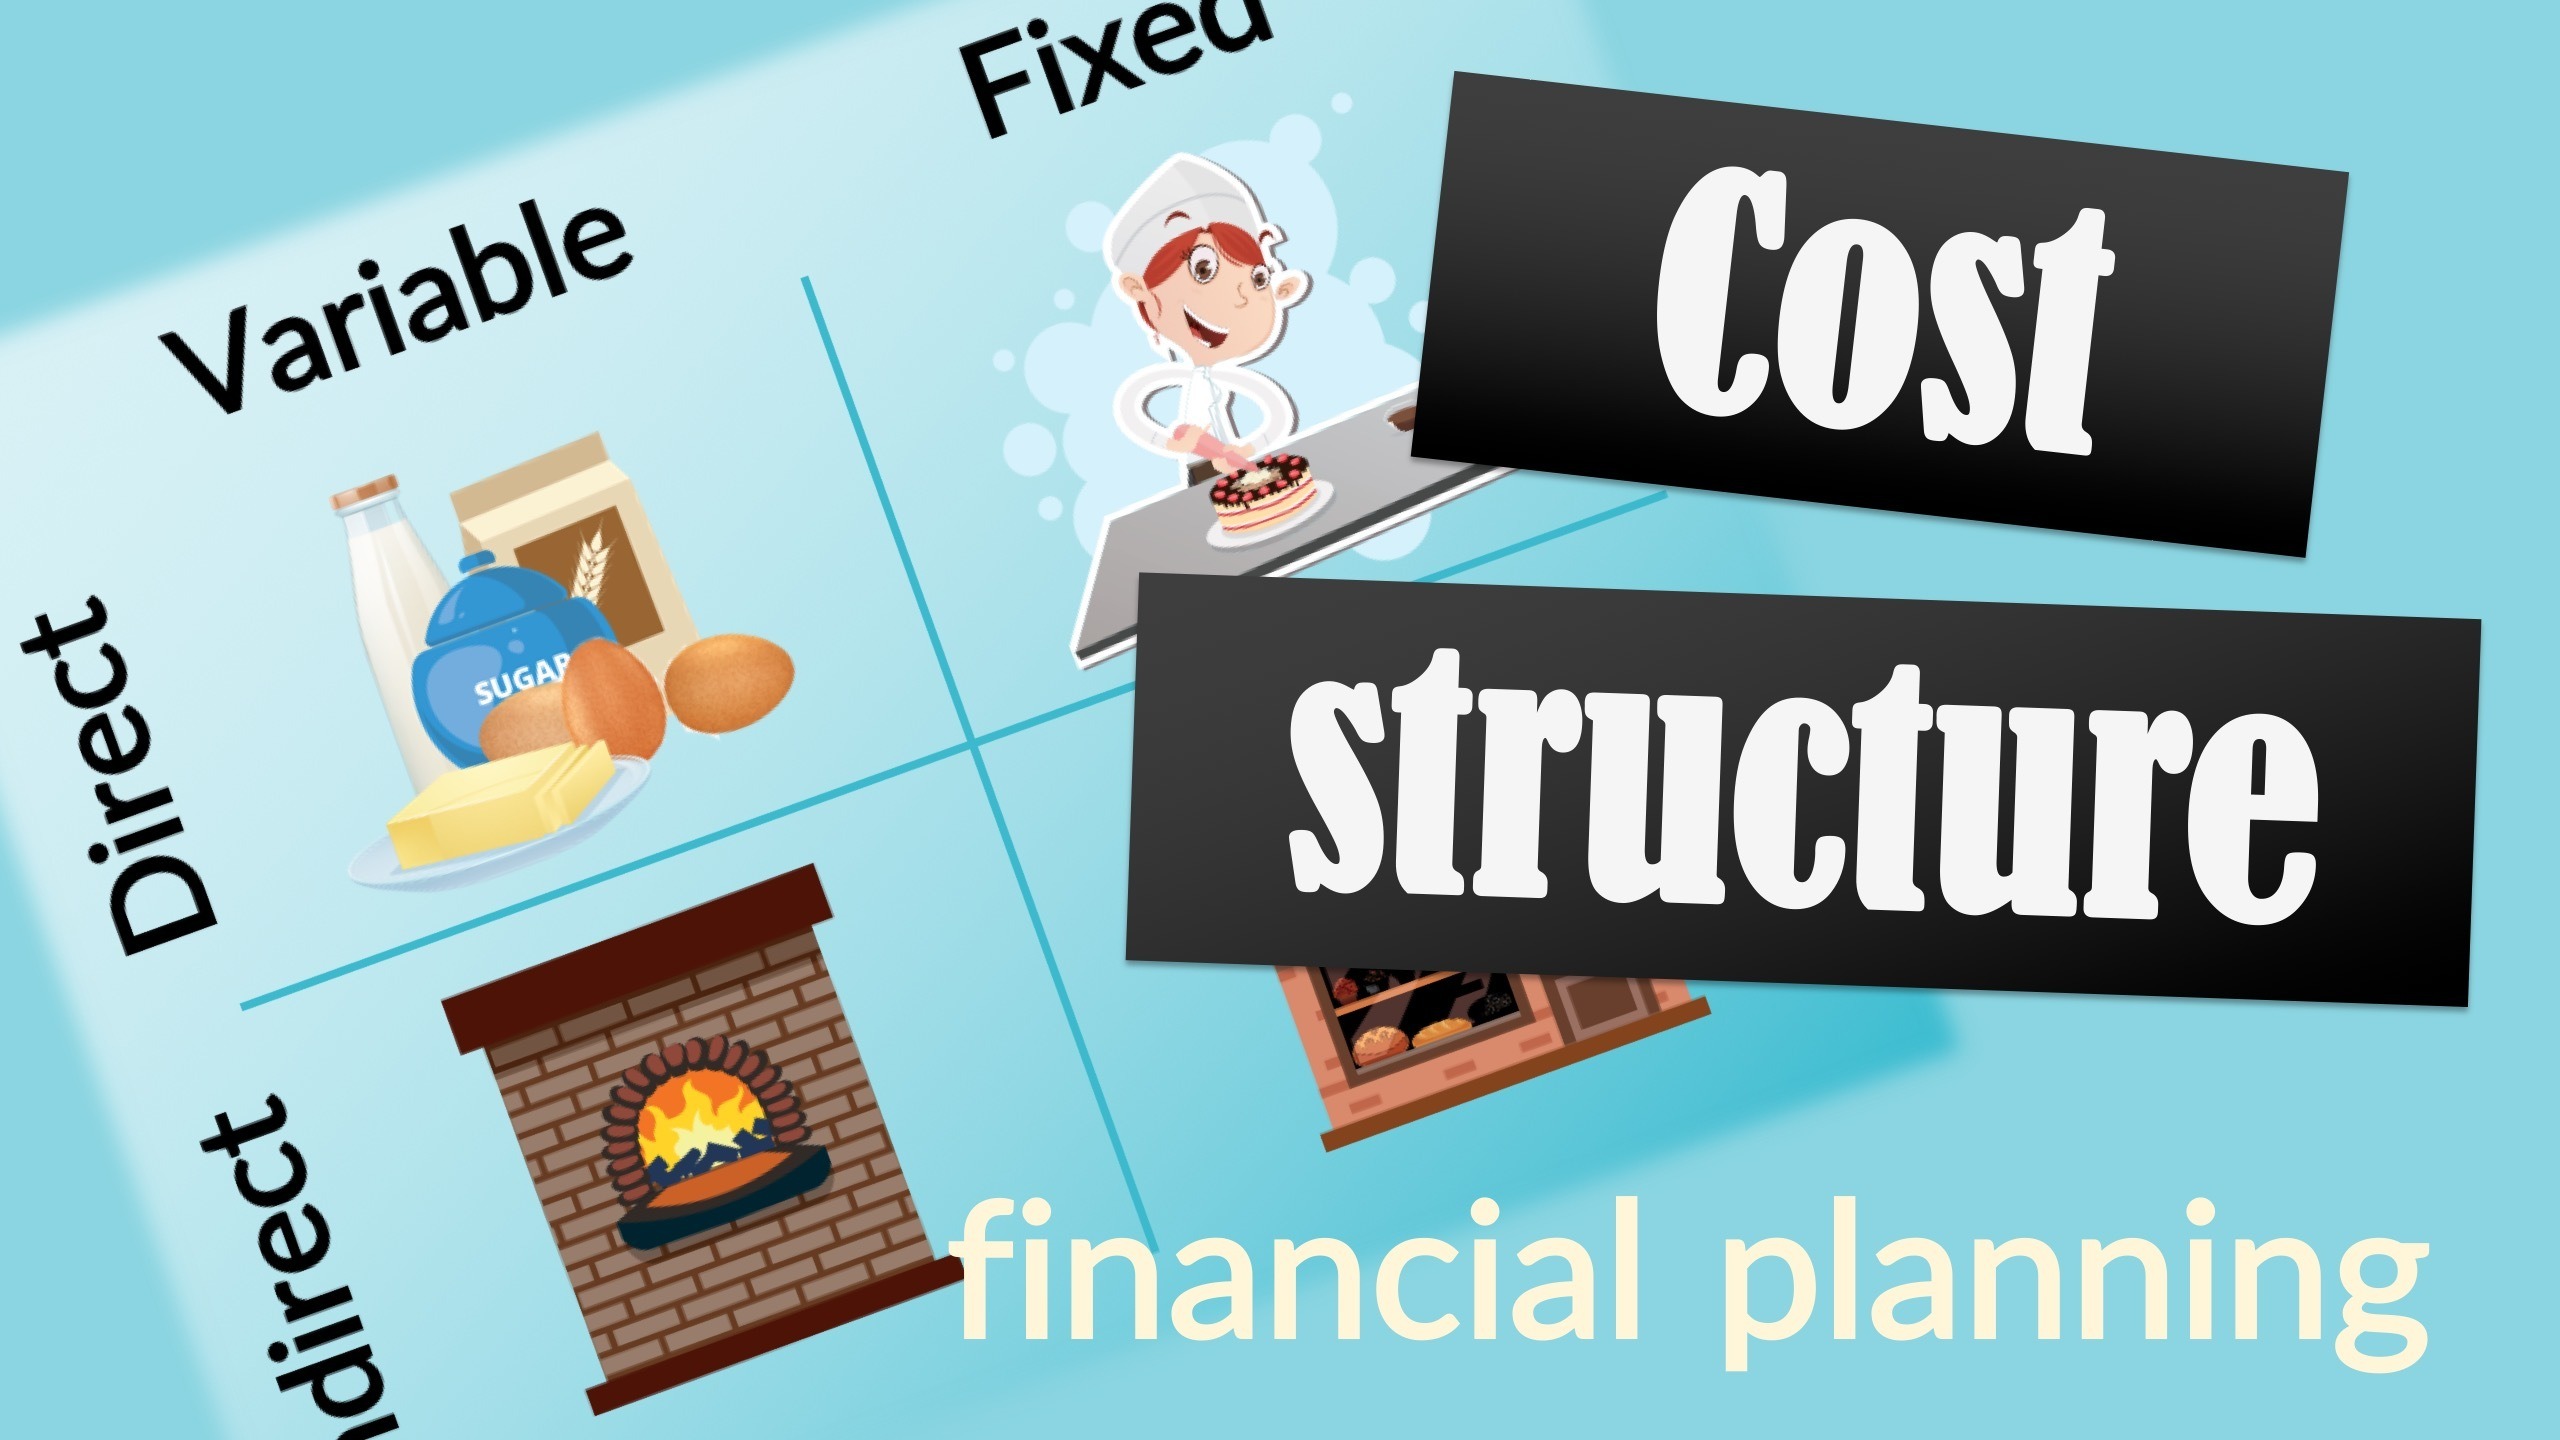 Cost structure: what is it, and what are the different types of costs?